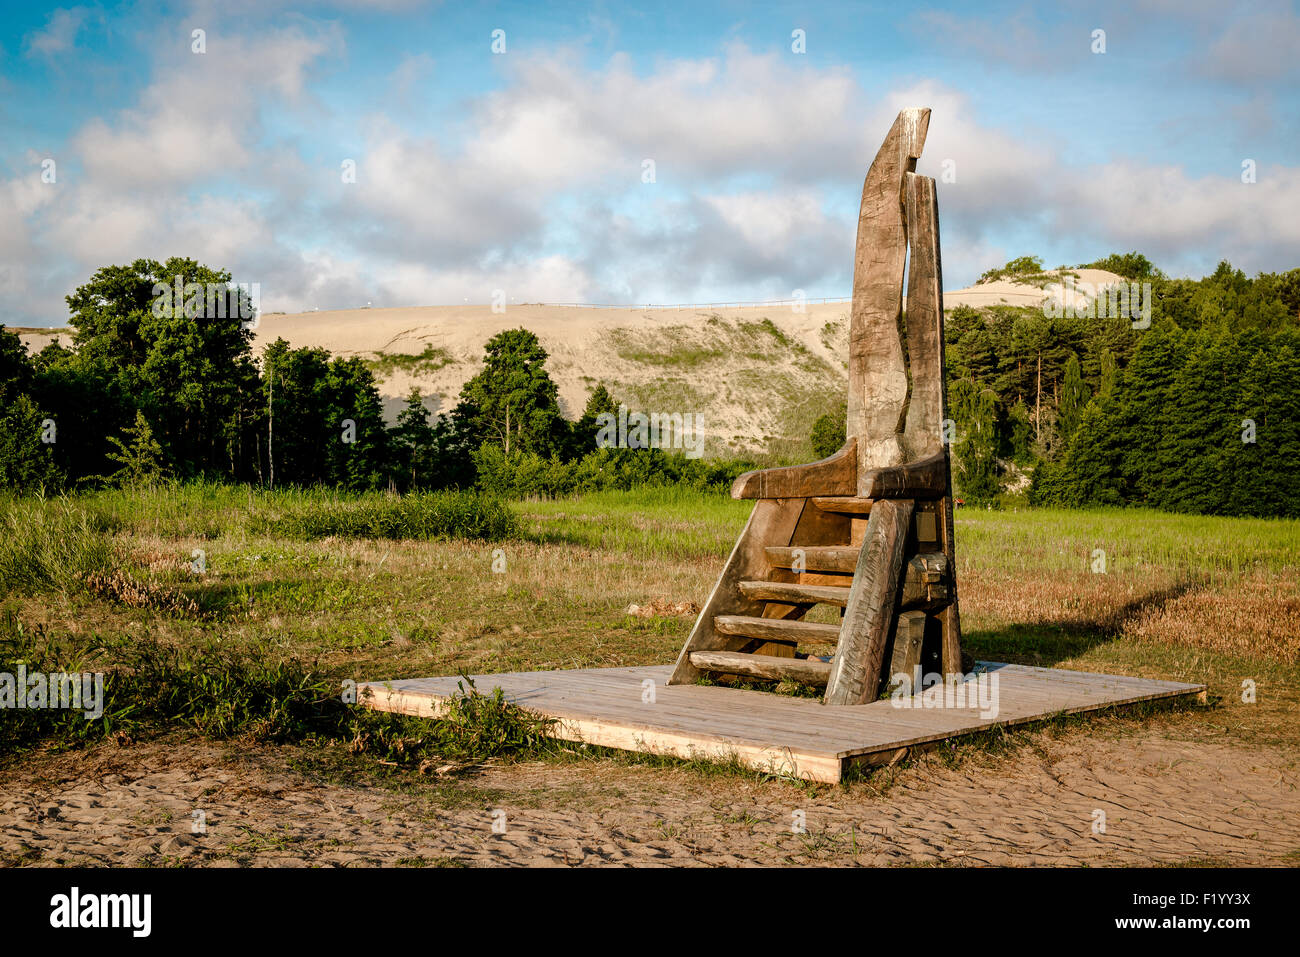 Wooden chair in the Curonian Spit Stock Photo